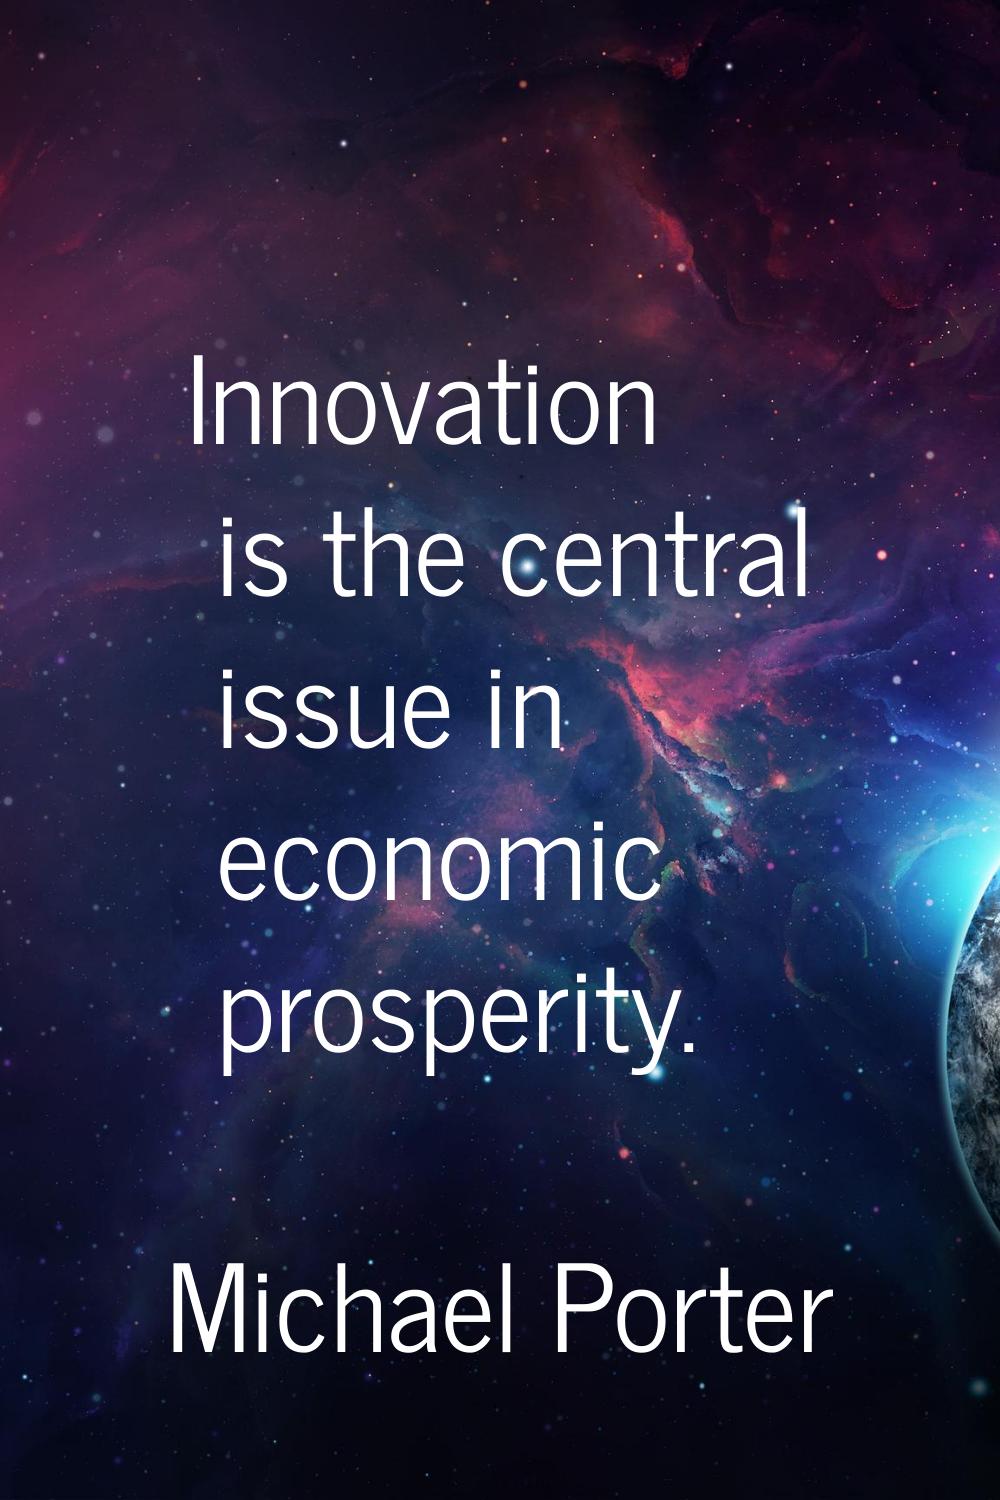 Innovation is the central issue in economic prosperity.